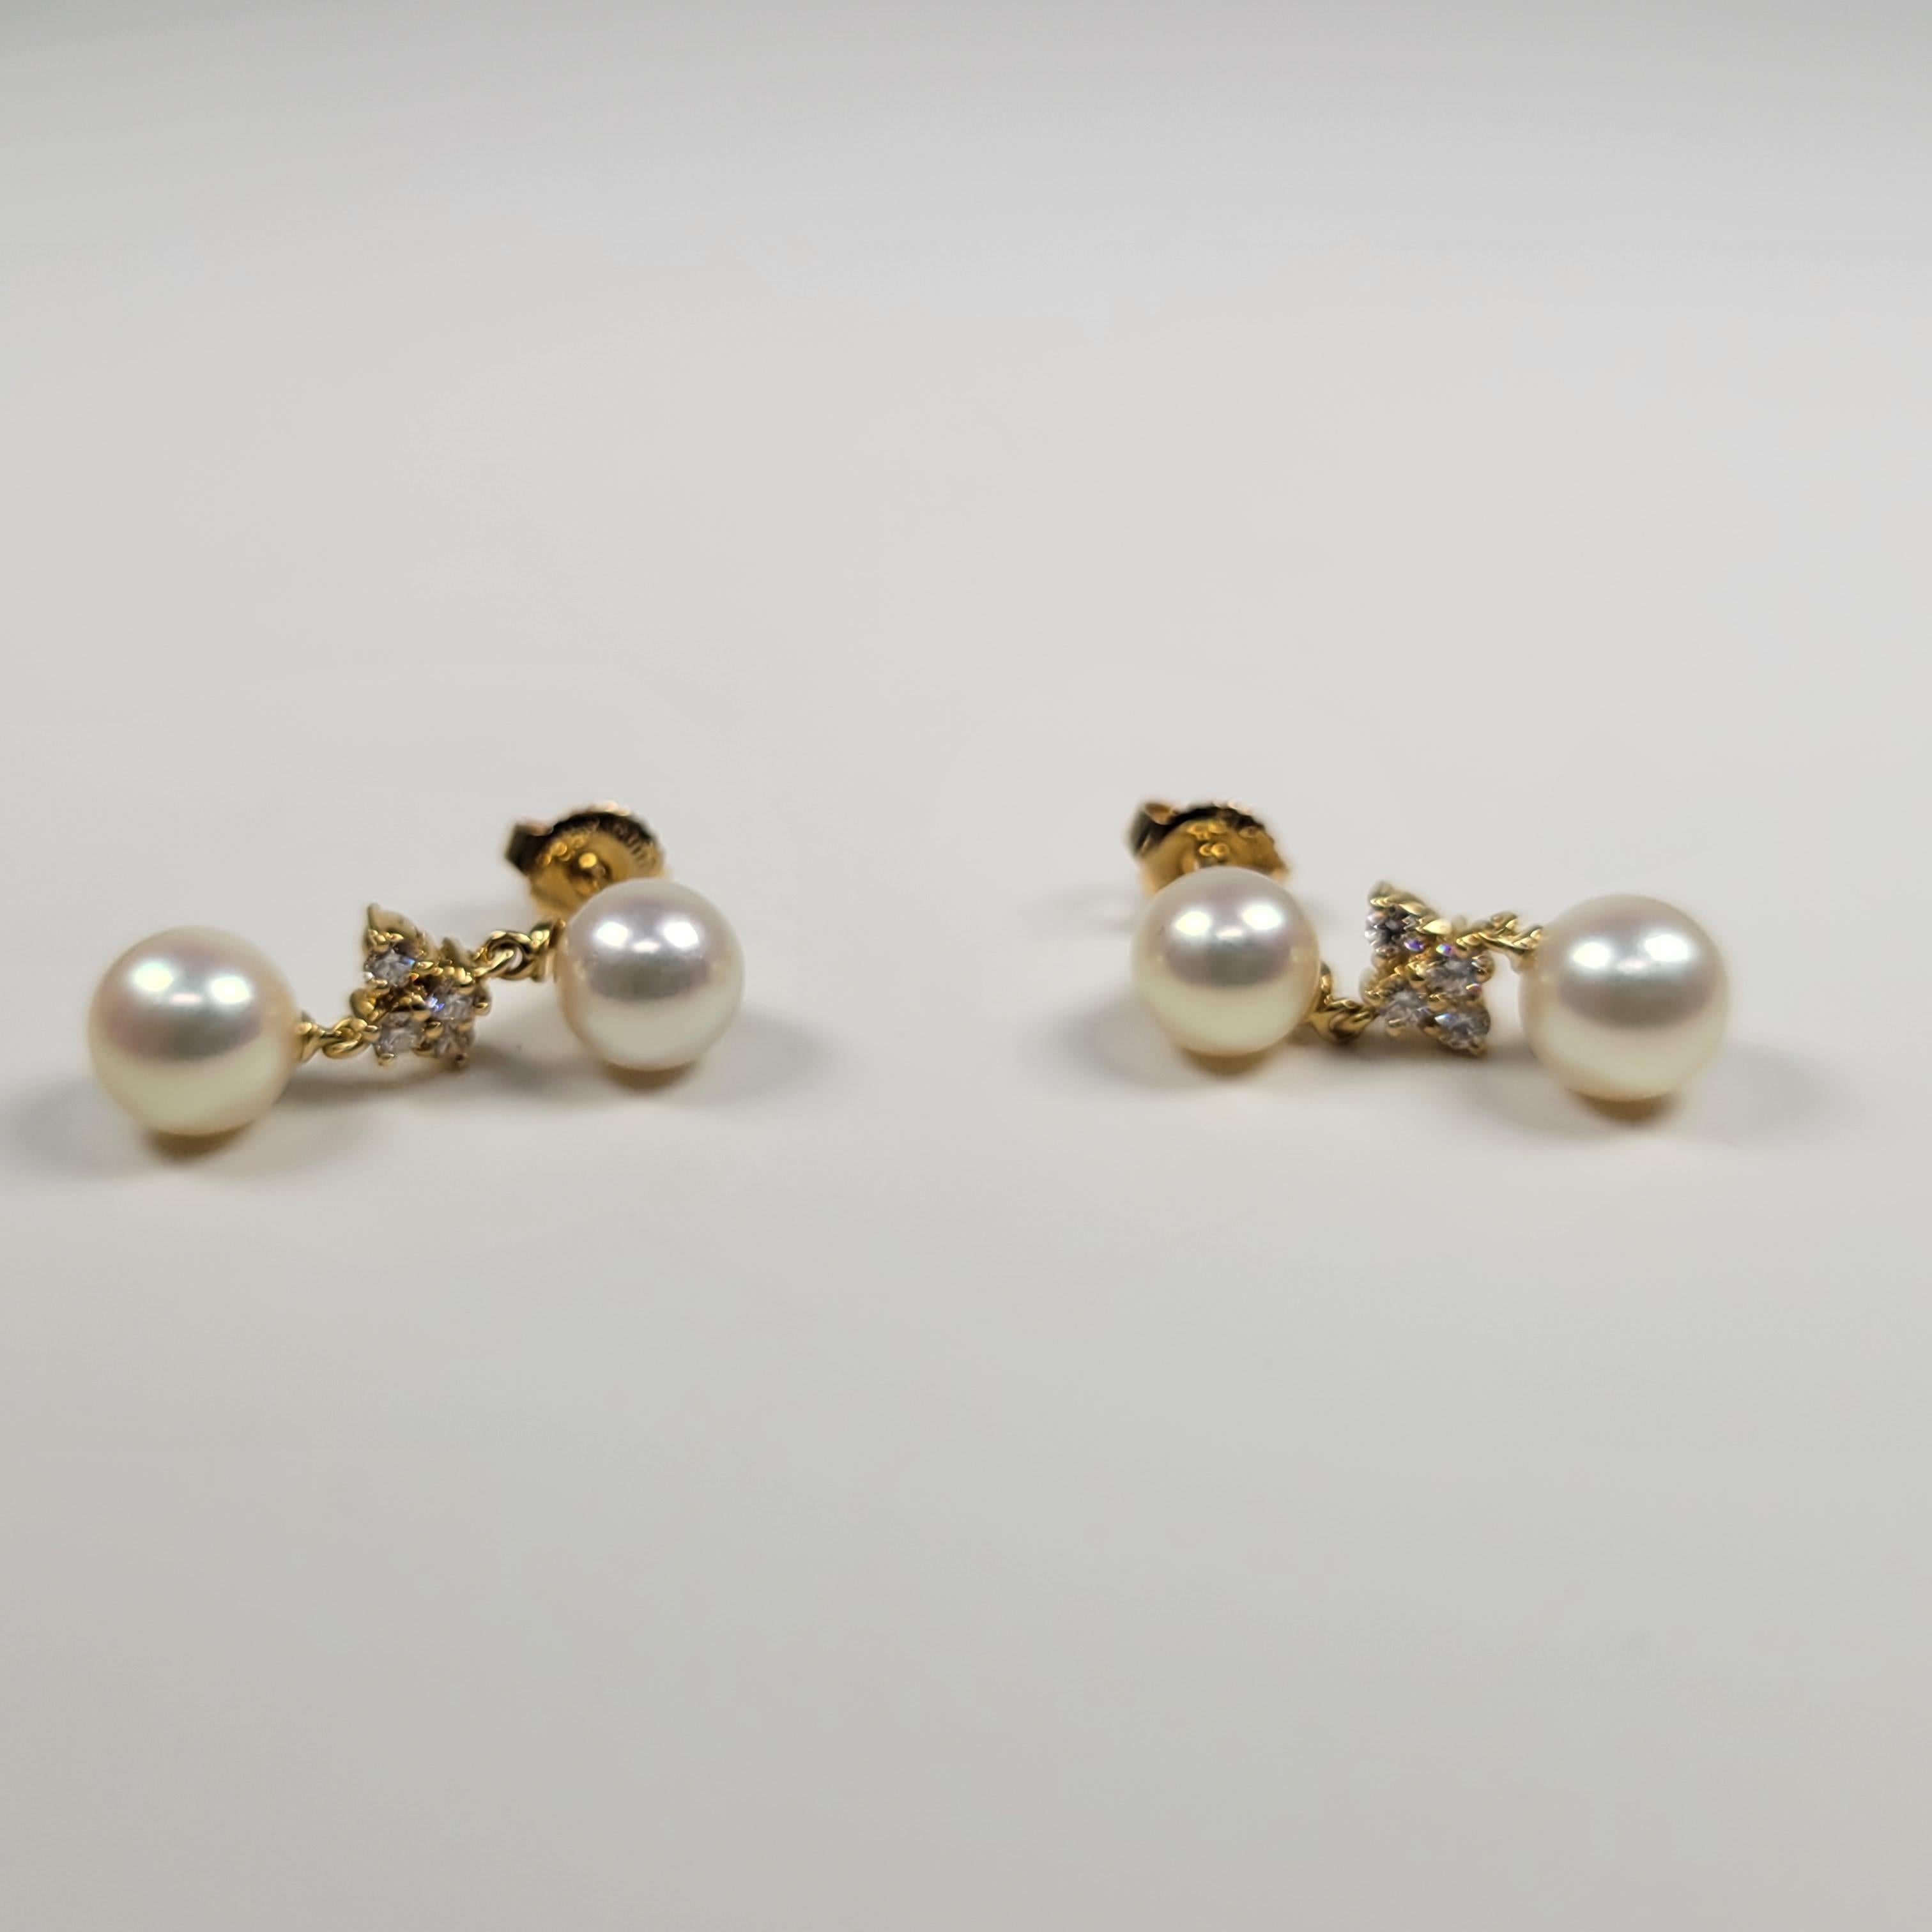 Such a classic look from famed designer Mikimoto!  The beautiful pearls measure 6.00 mm - 7.00 mm each and are accented with round diamonds. 